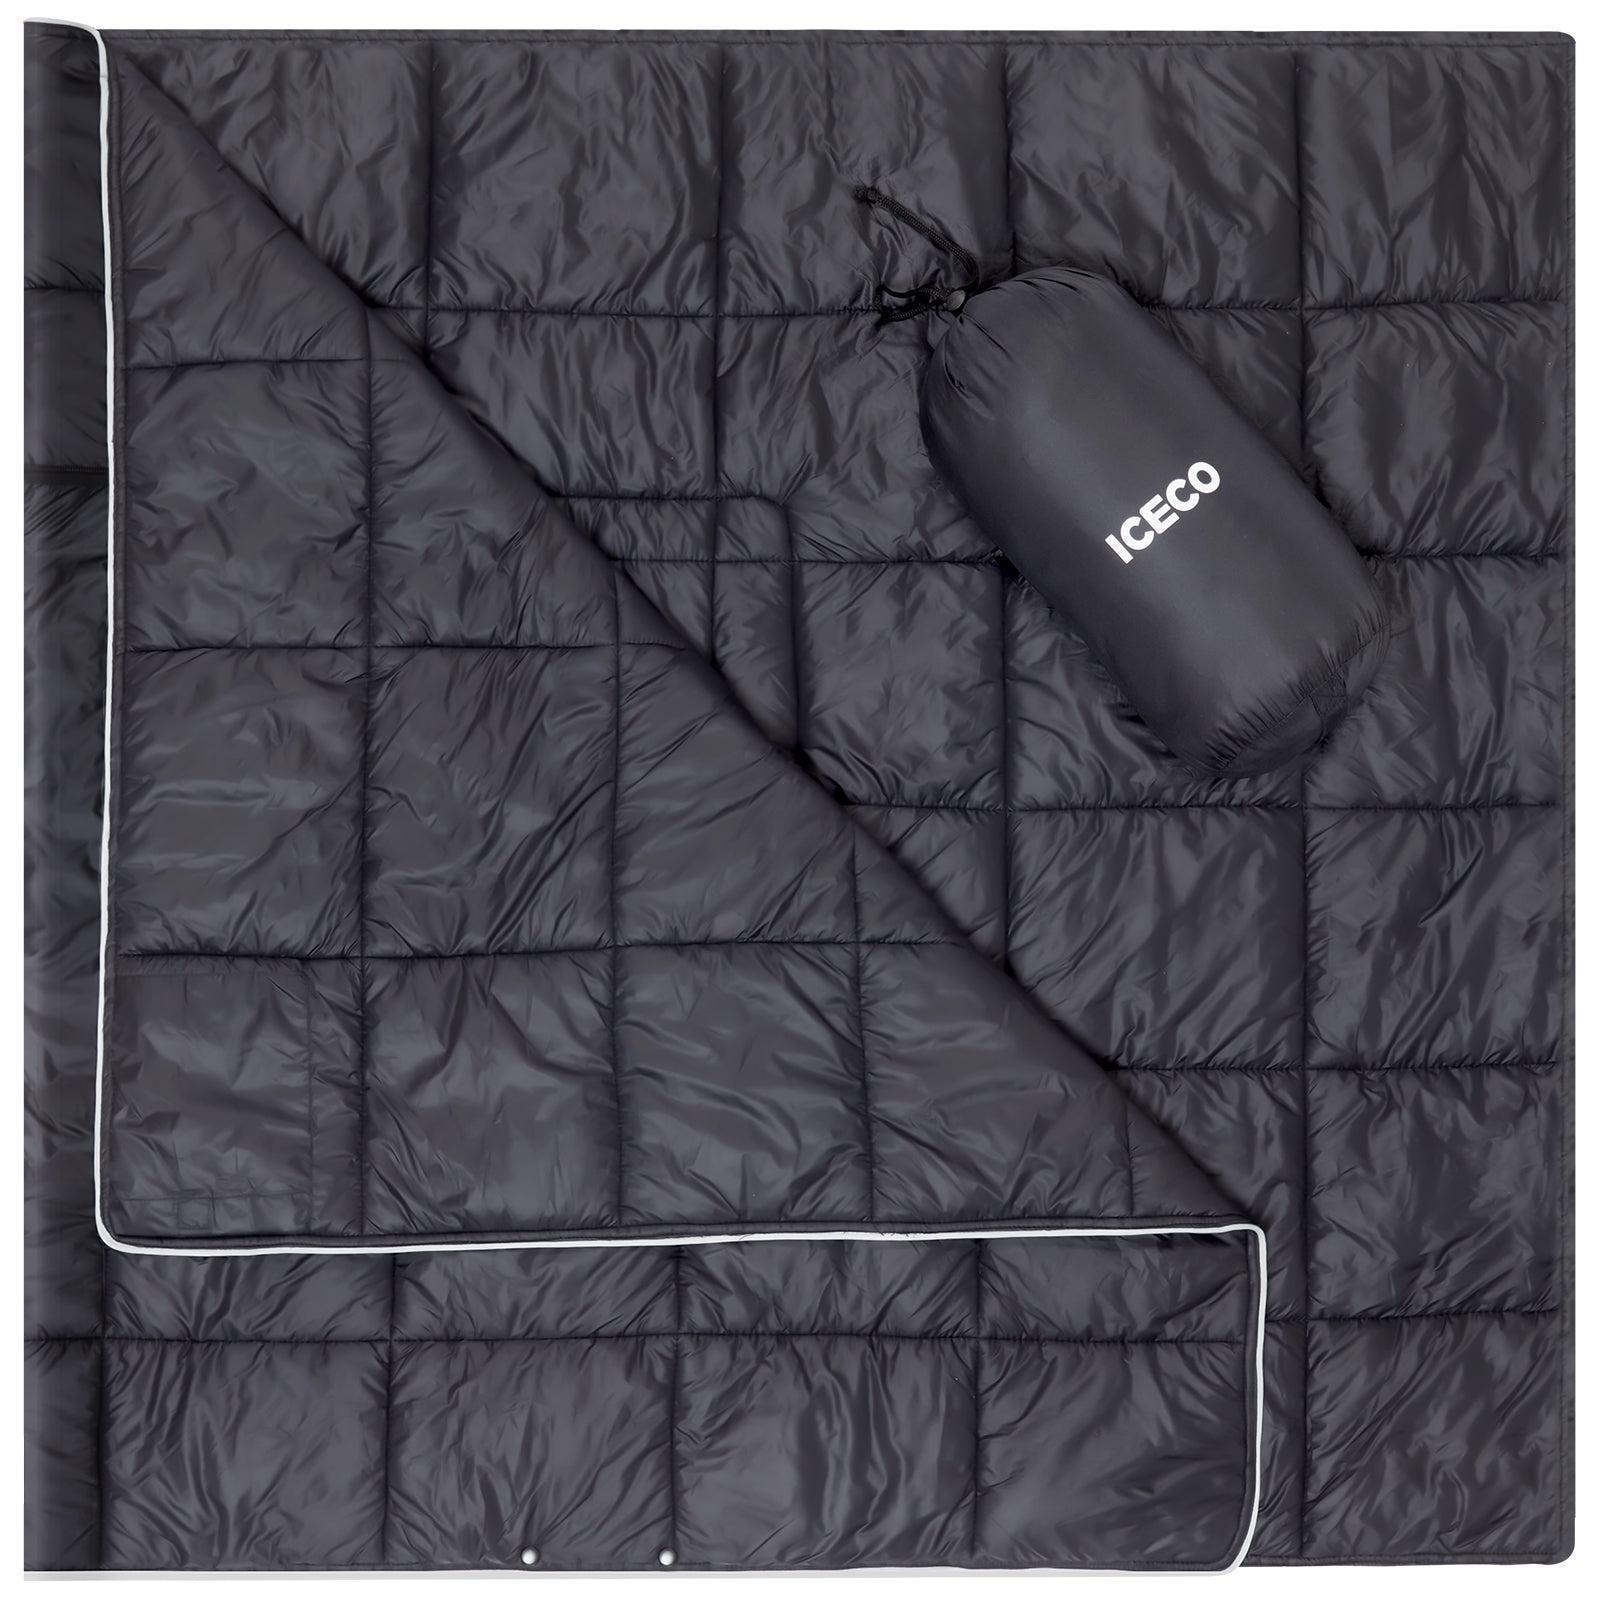 Camping Blanket, Sustainable Insulated Outdoor Blanket | ICECO-www.icecofreezer.com